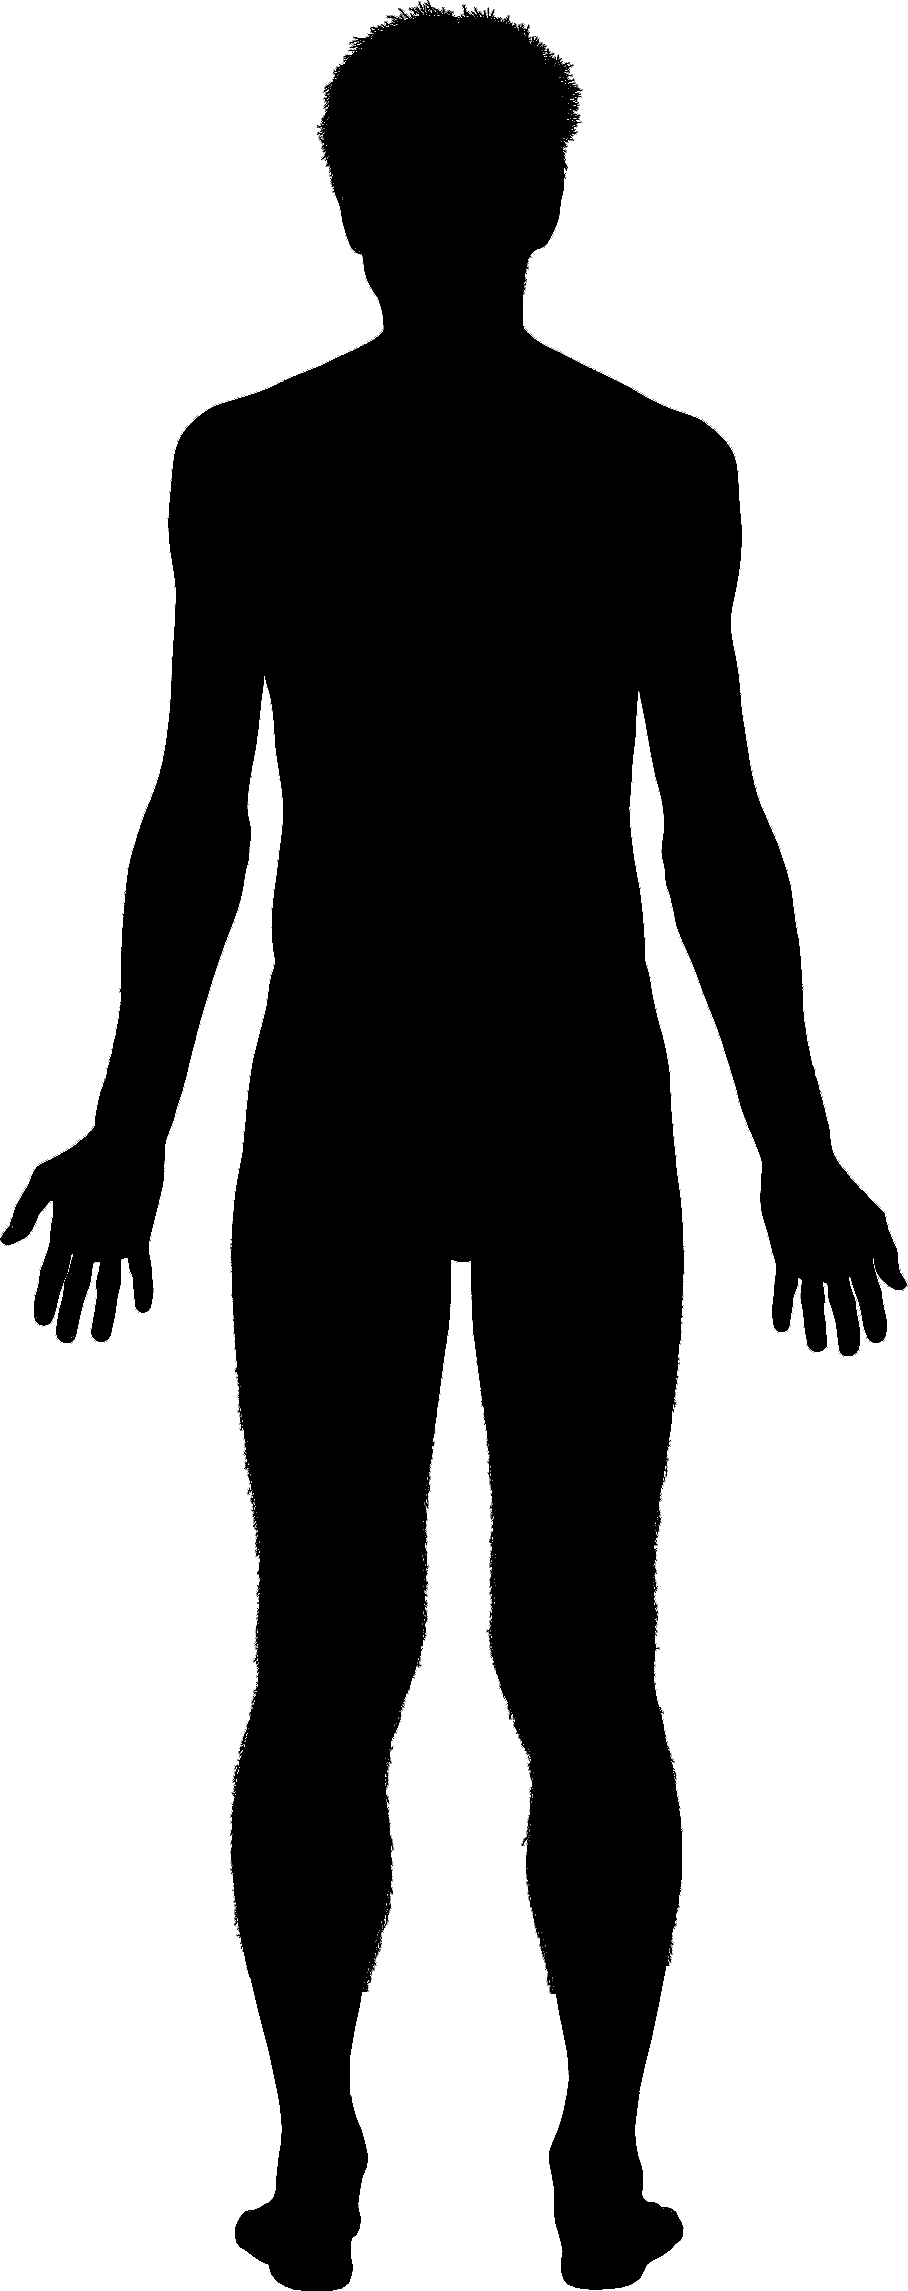 free clipart human body outline - photo #46